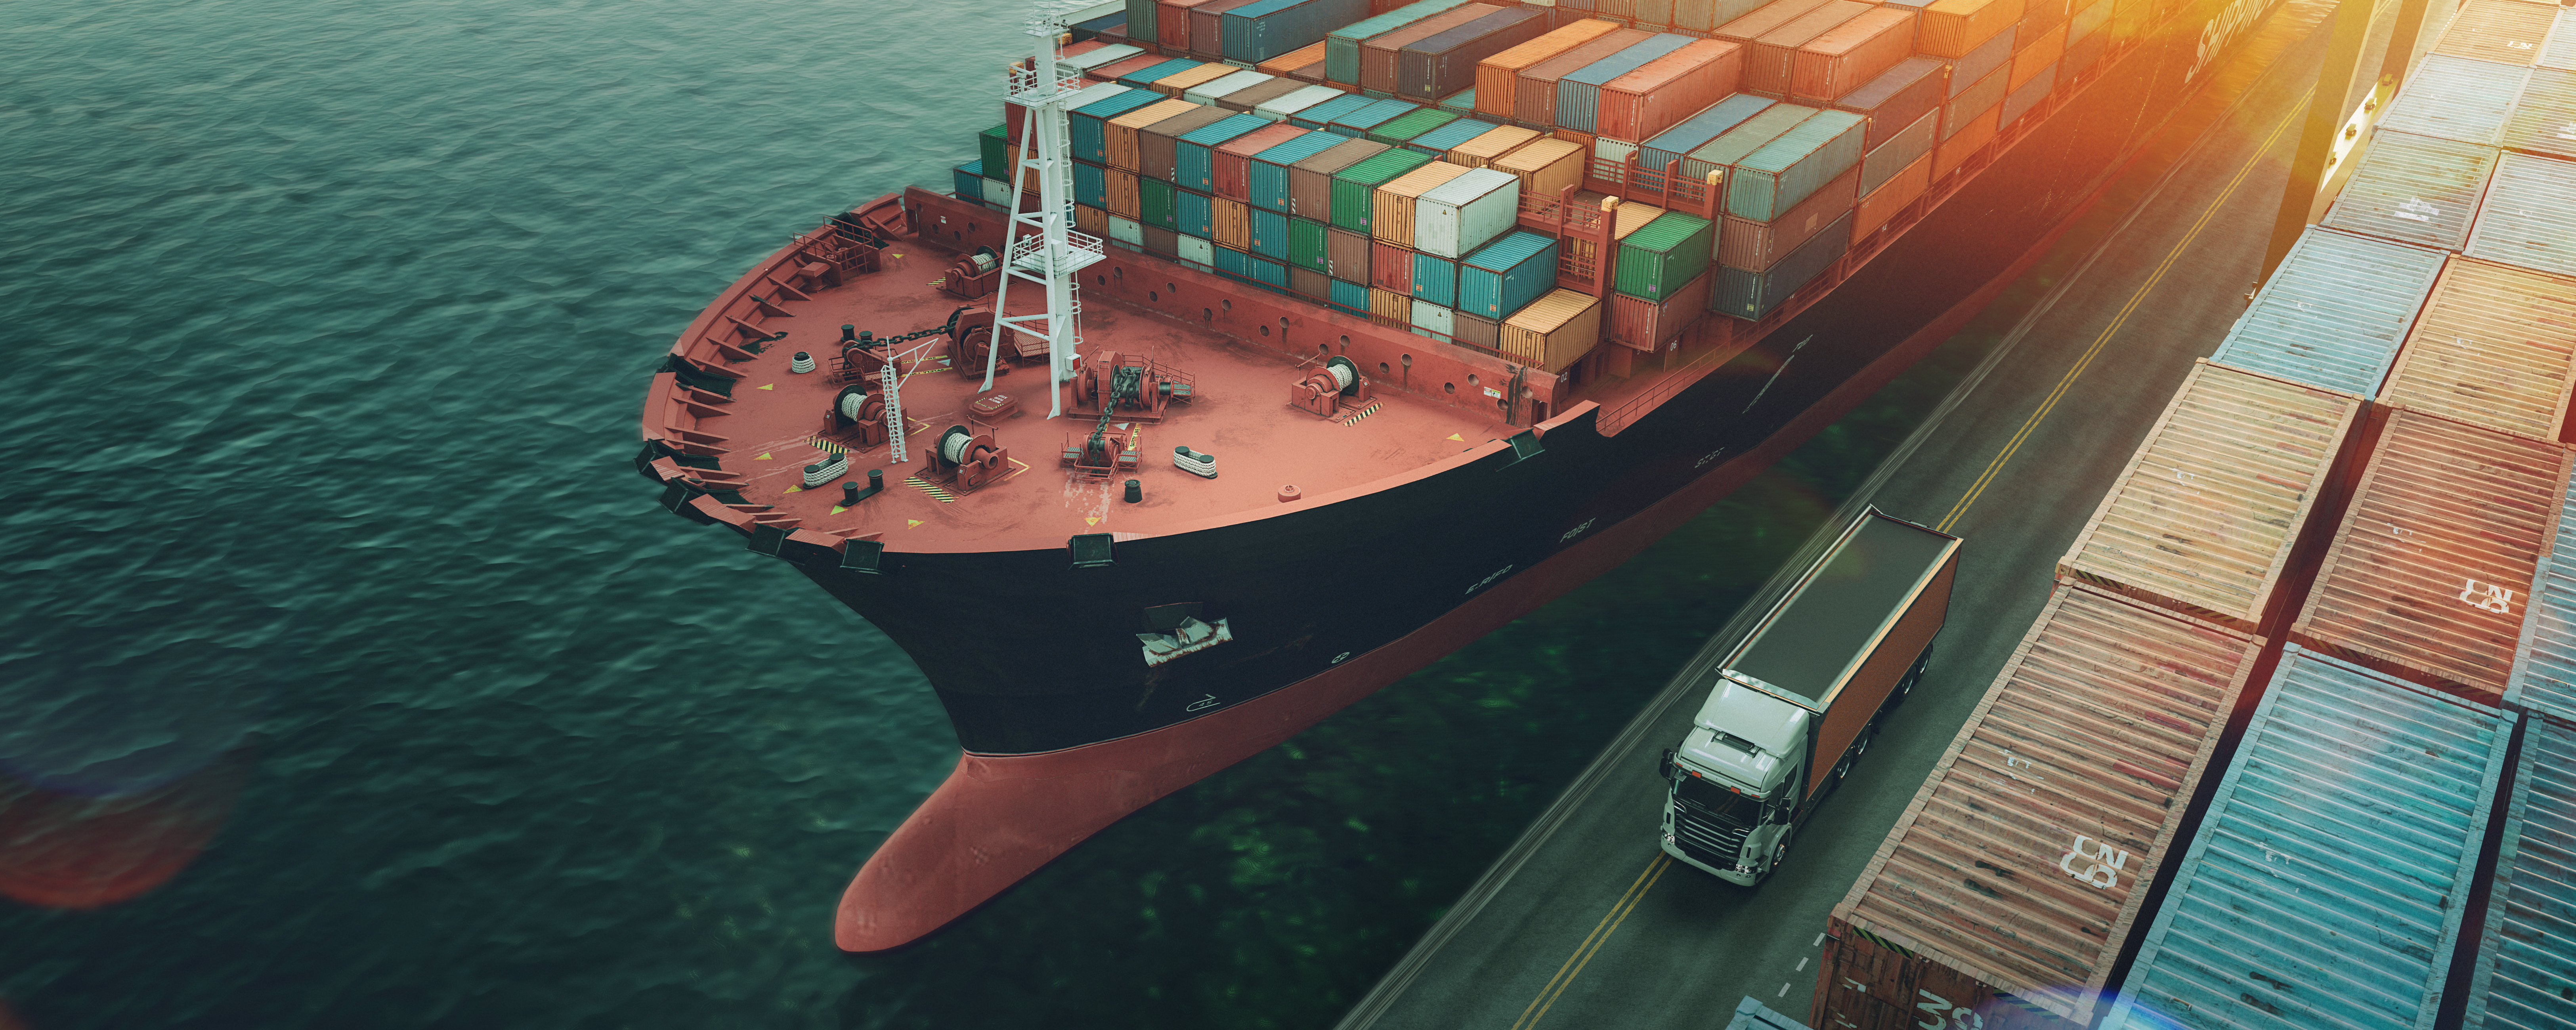 Transportation and logistics of Container Cargo ship and Cargo plane. 3d rendering and illustration.